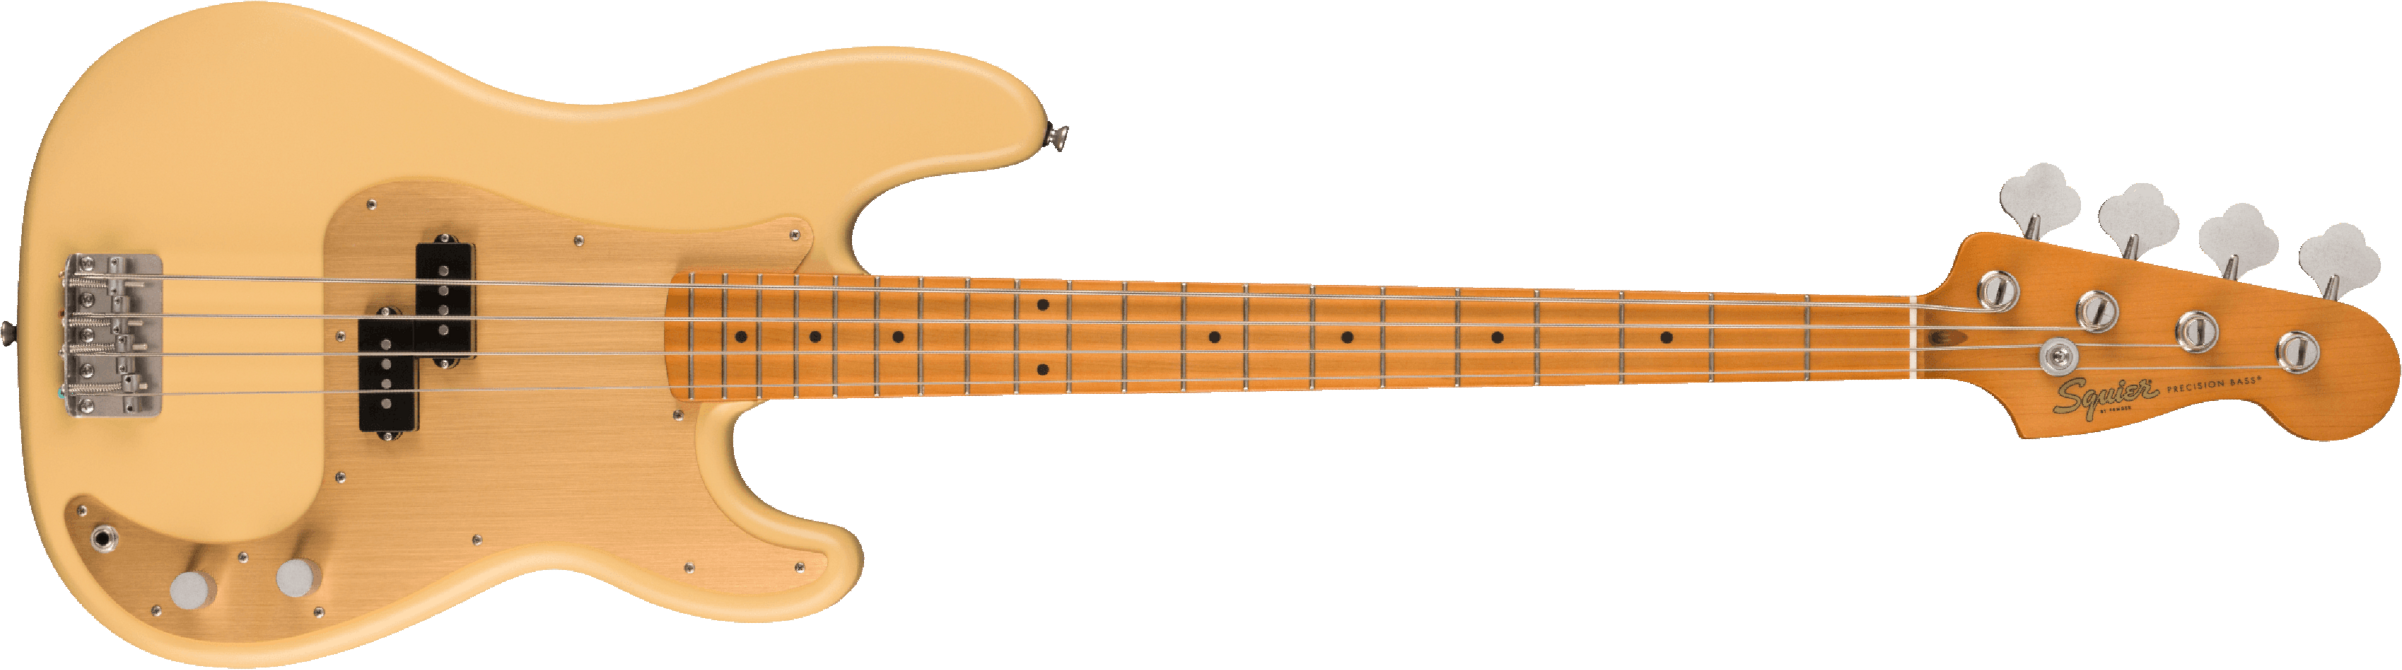 Squier Precision Bass 40th Anniversary Gold Edition Mn - Satin Vintage Blonde - Basse Électrique Solid Body - Main picture